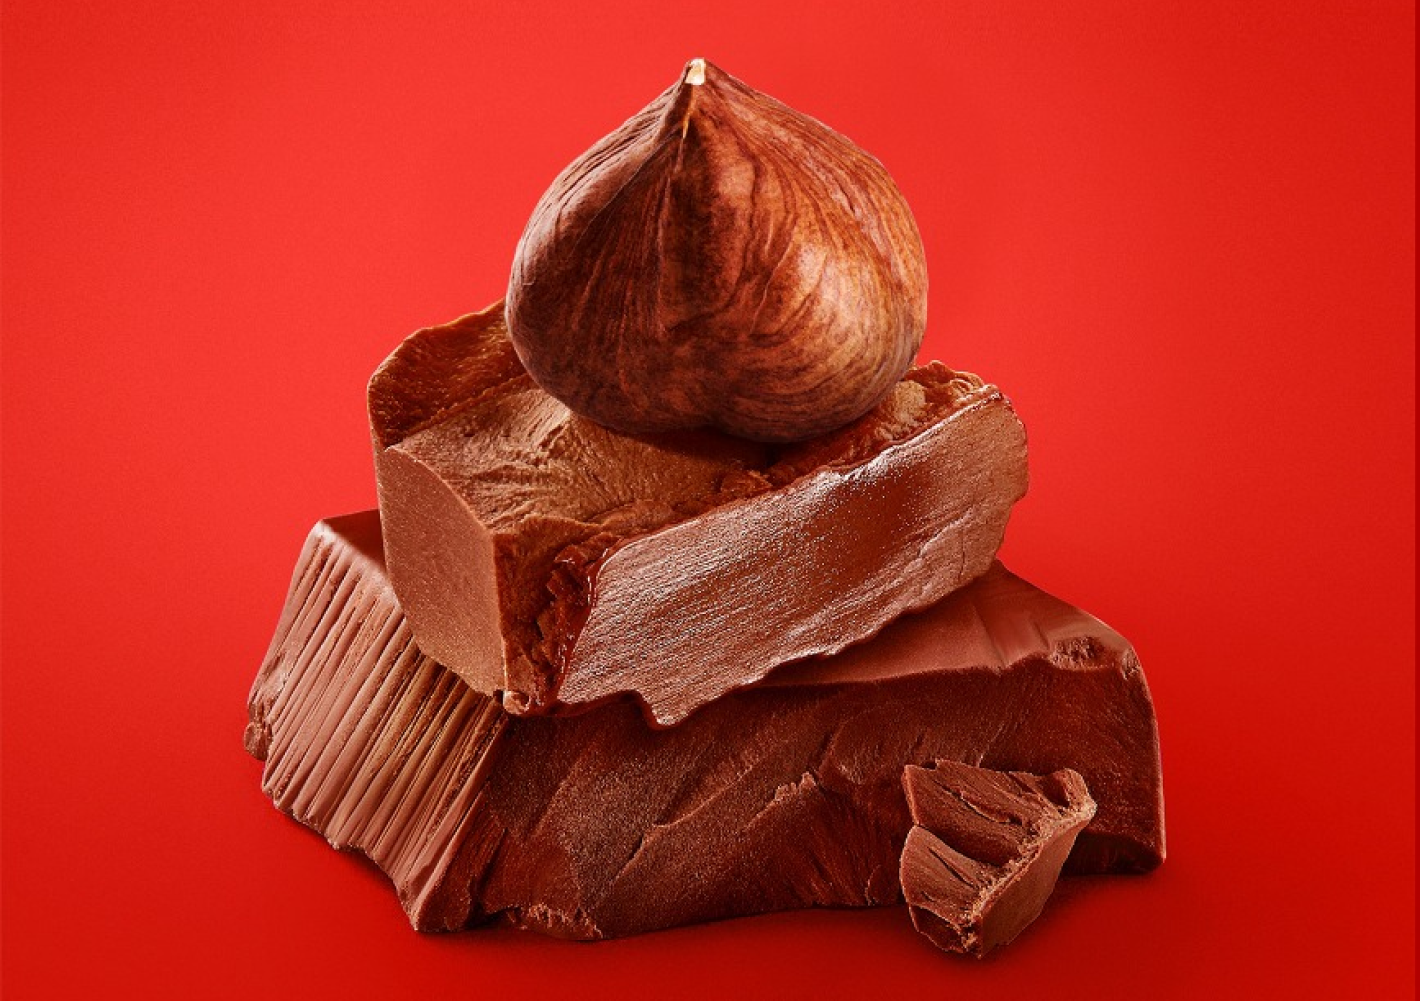 Chocolate and hazelnut, a story of taste and delight